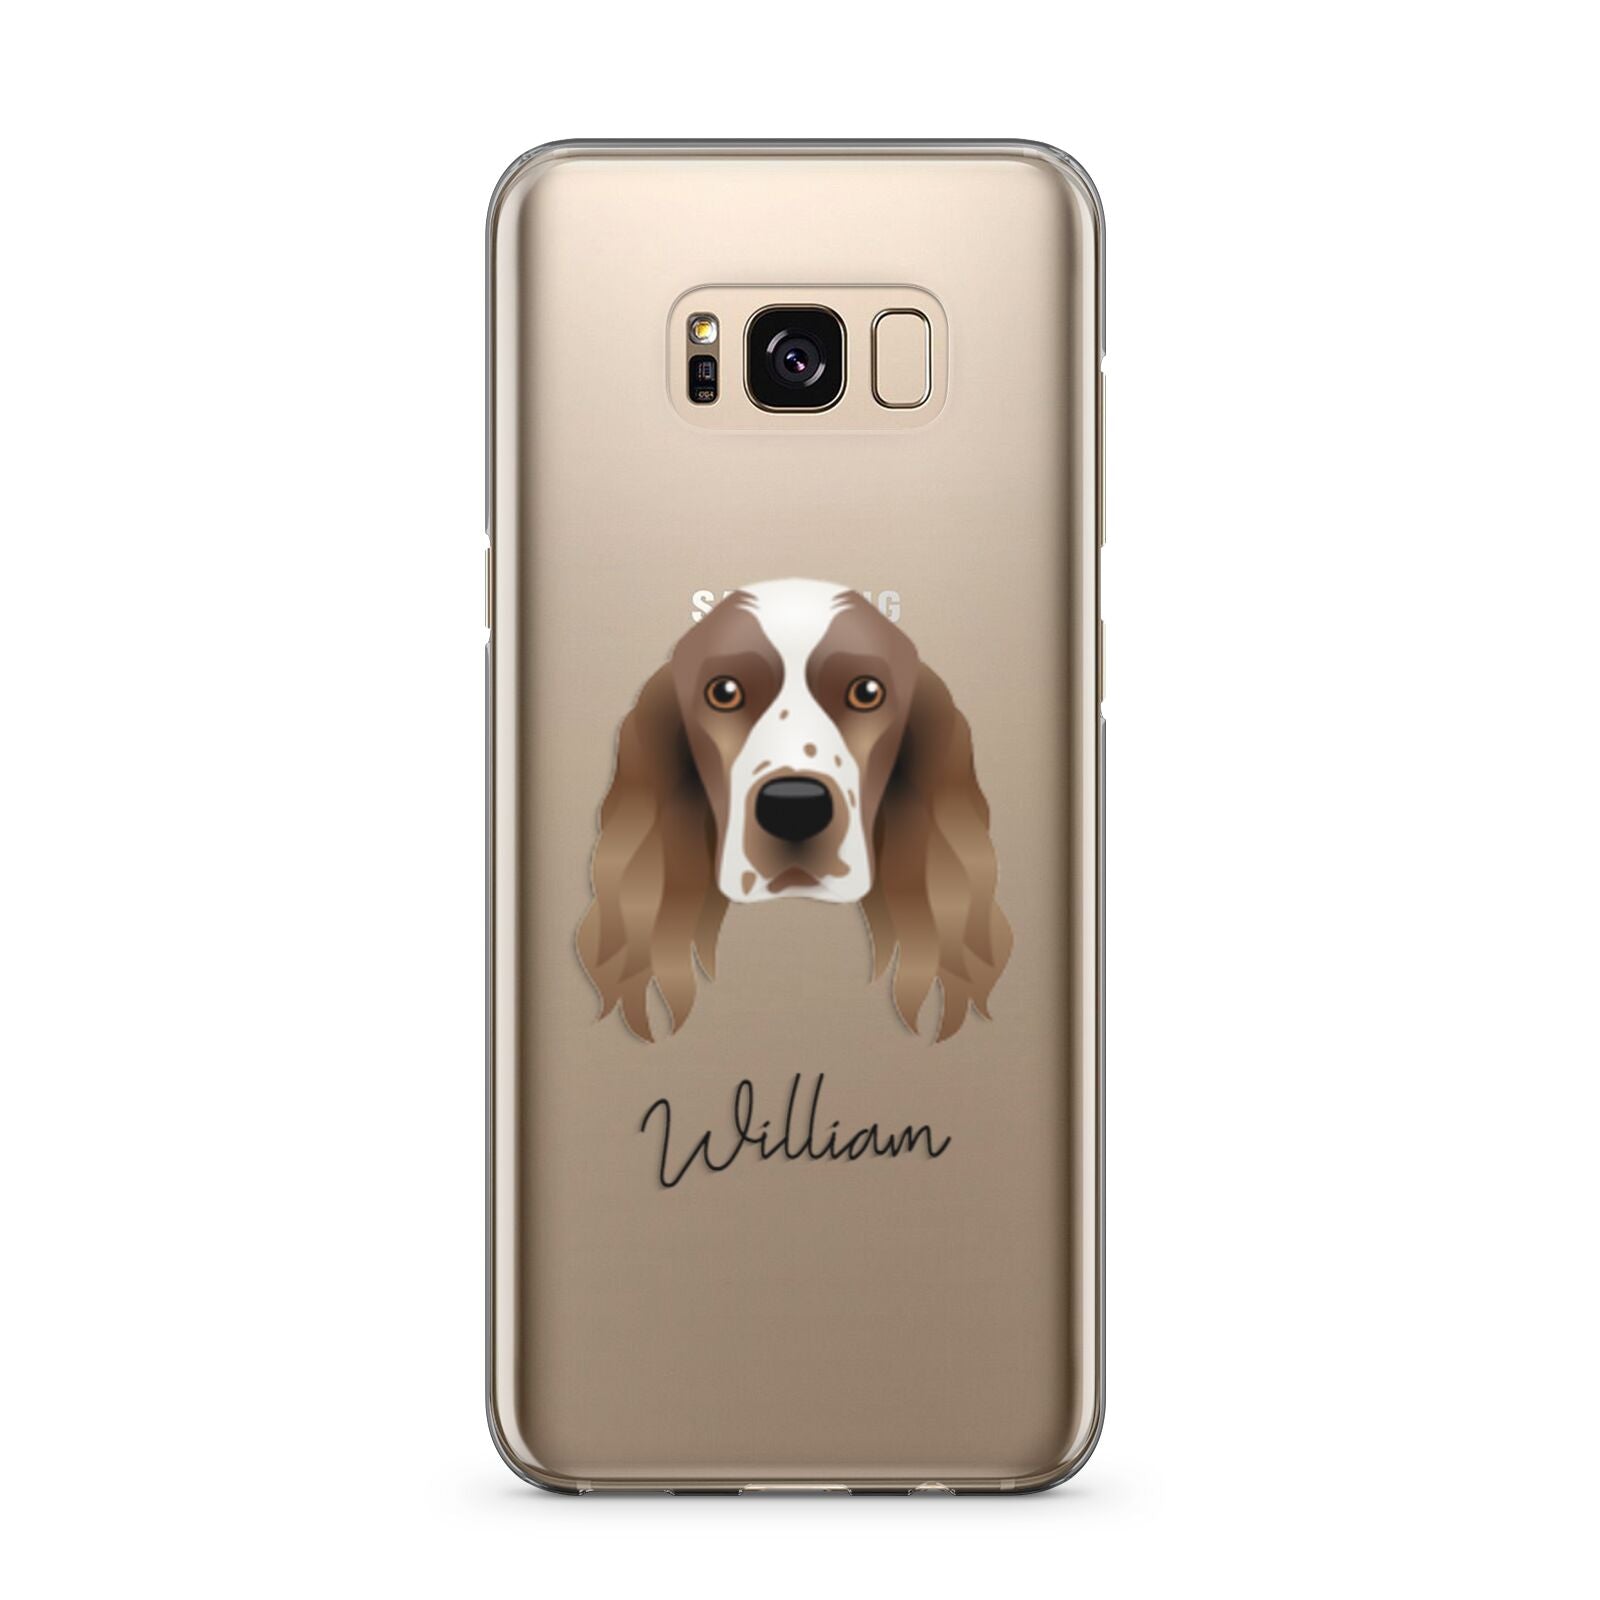 Welsh Springer Spaniel Personalised Samsung Galaxy S8 Plus Case